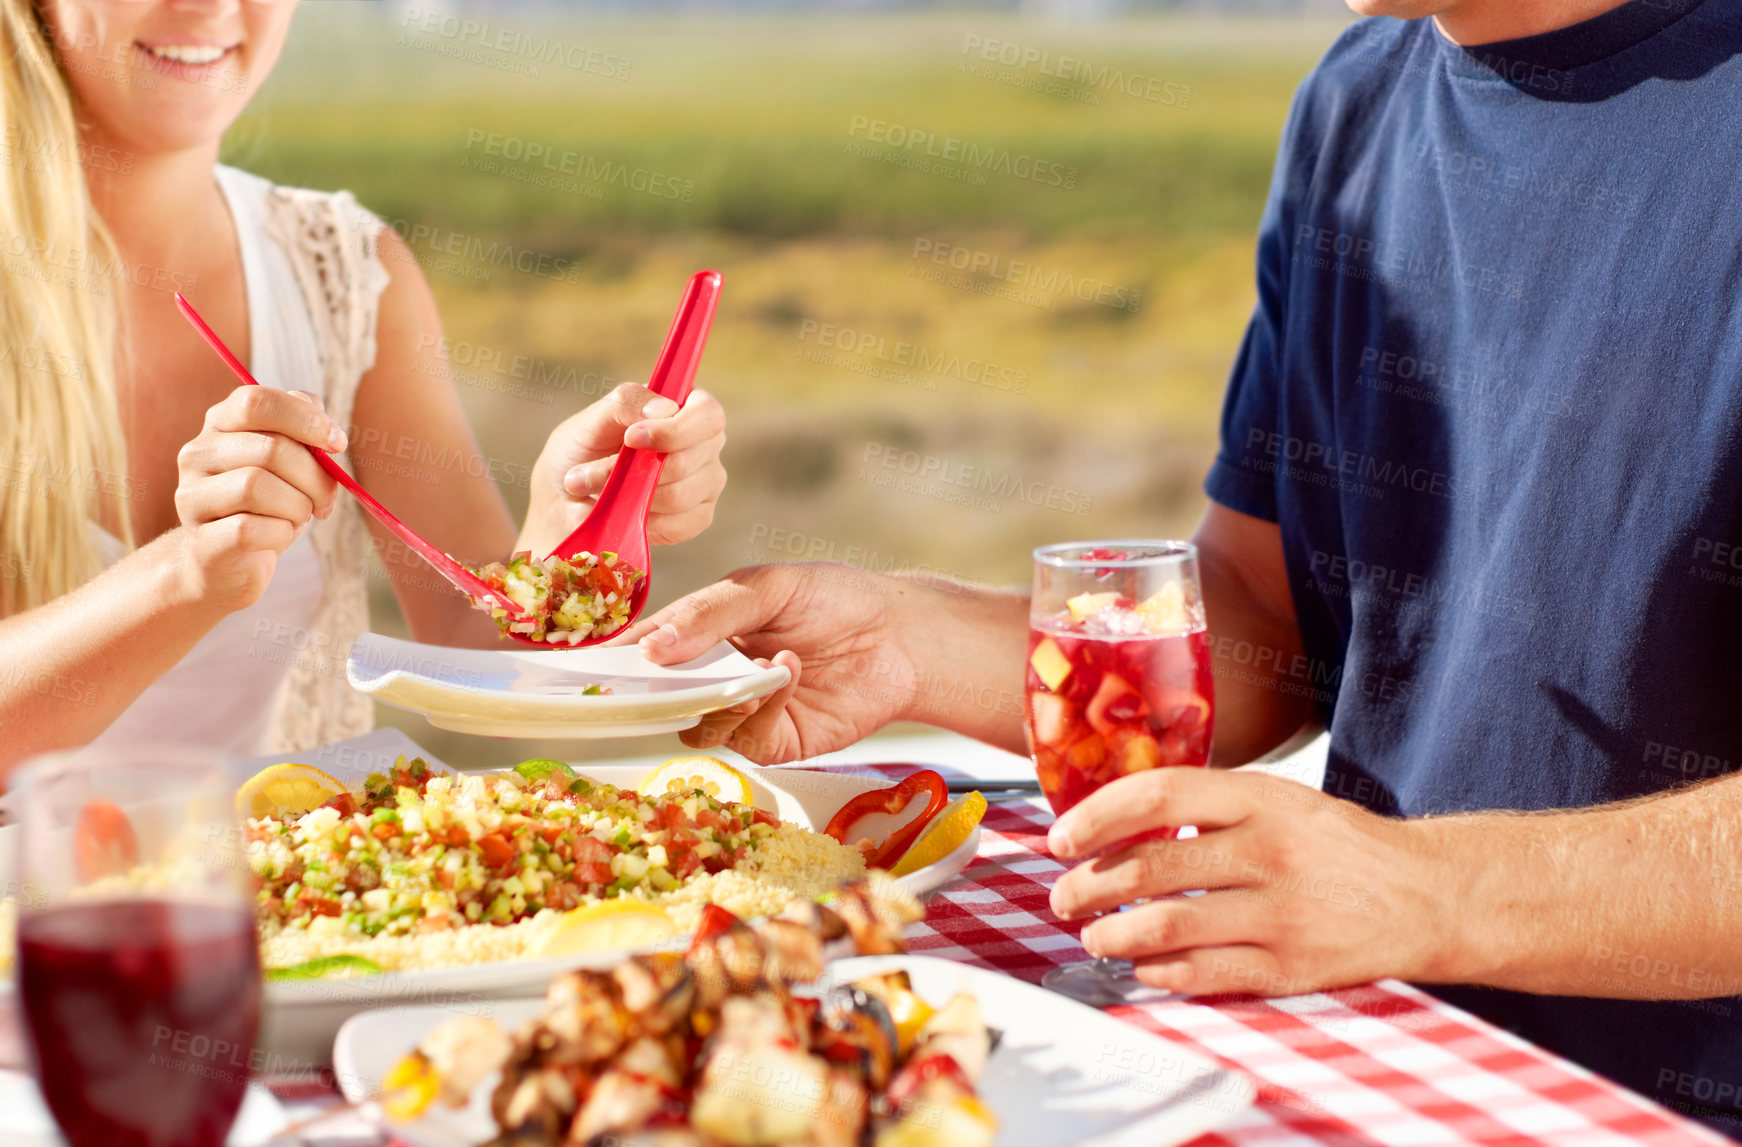 Buy stock photo Cropped image of a young couple eating a meal outside